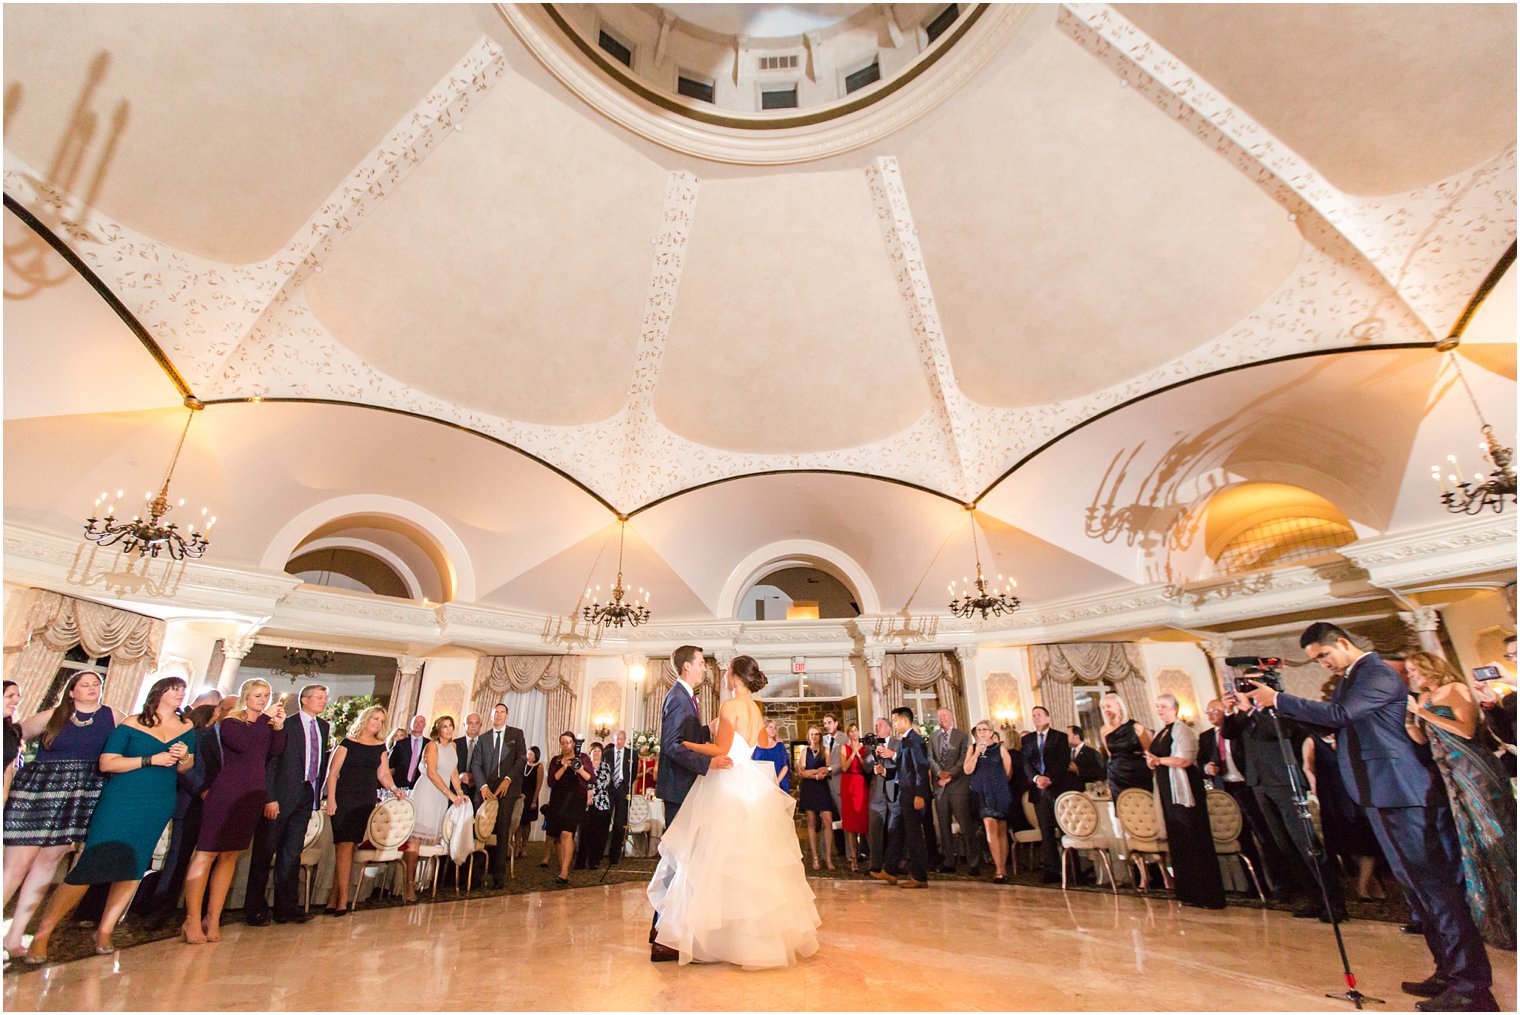 Bride and groom's first dance at Pleasantdale Chateau Wedding Reception 